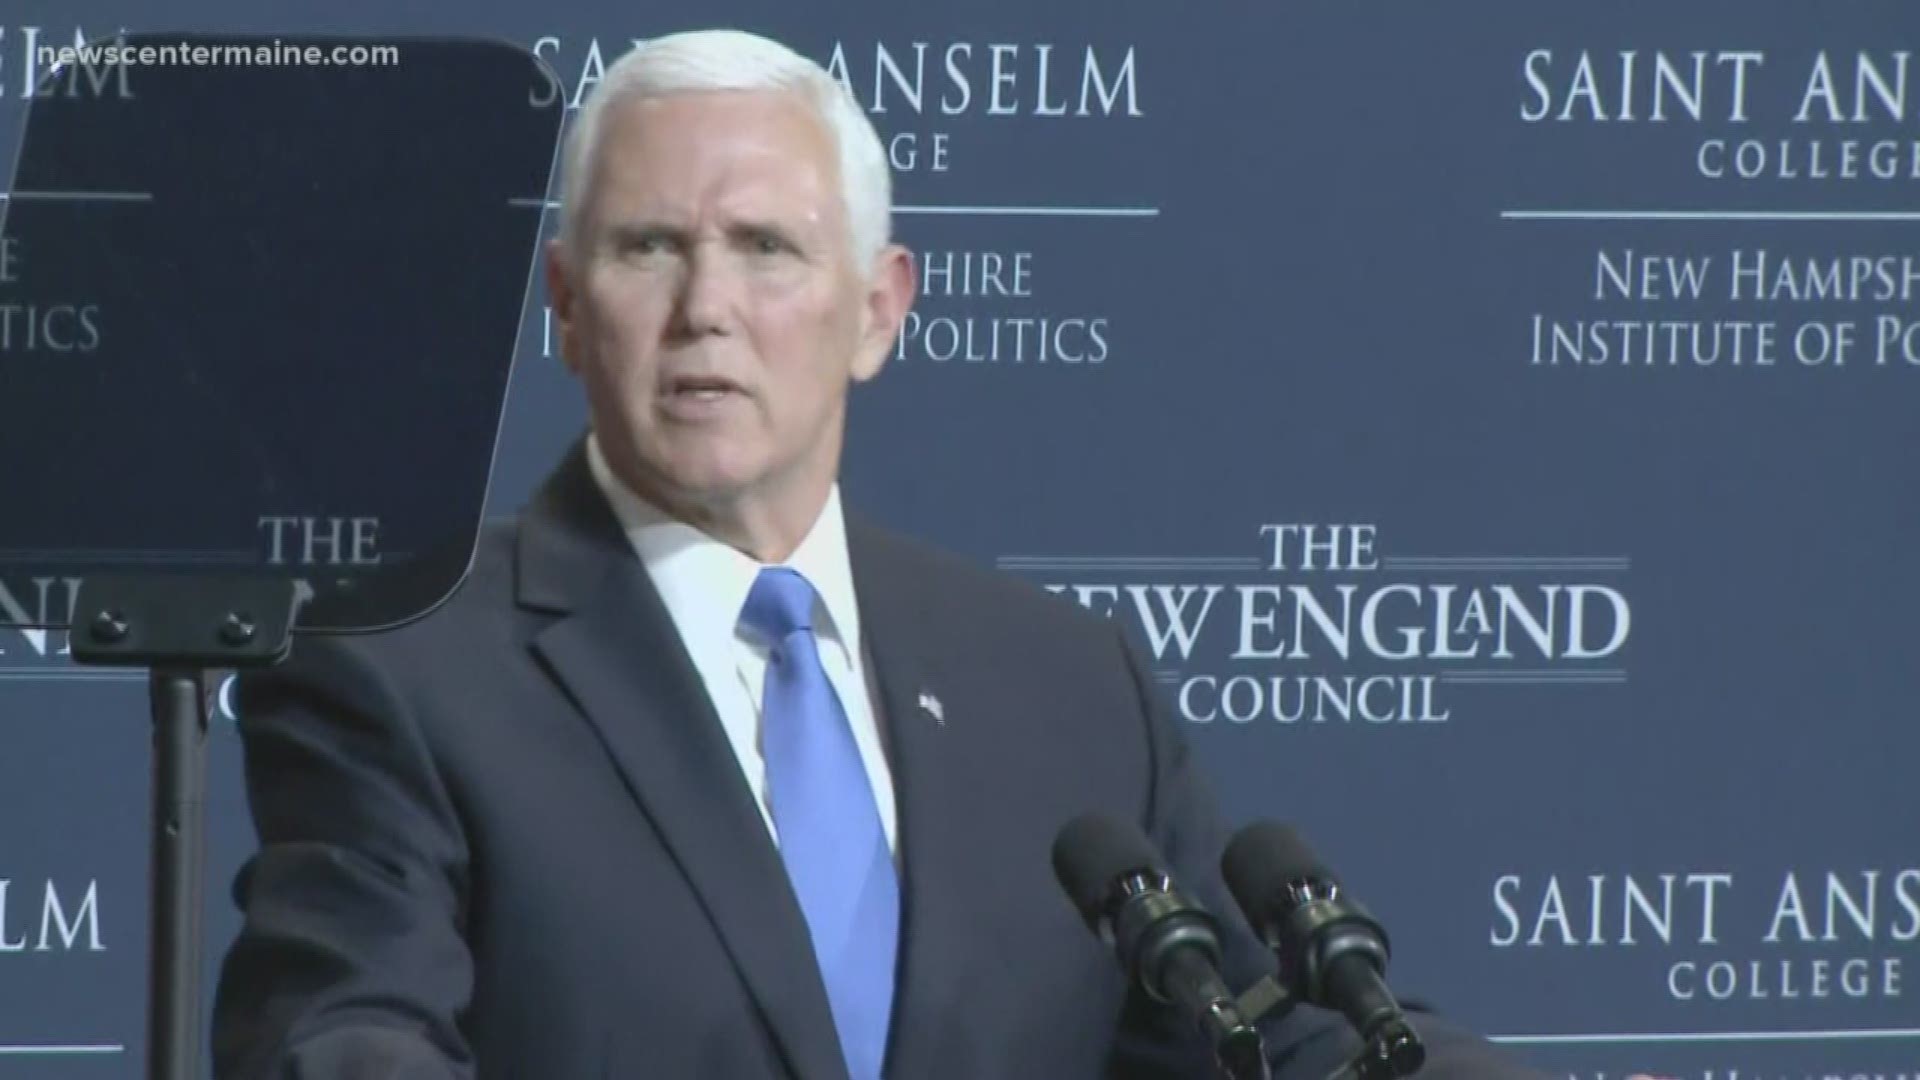 Pence spoke at the New Hampshire Institute of Politics at Saint Anselm College.